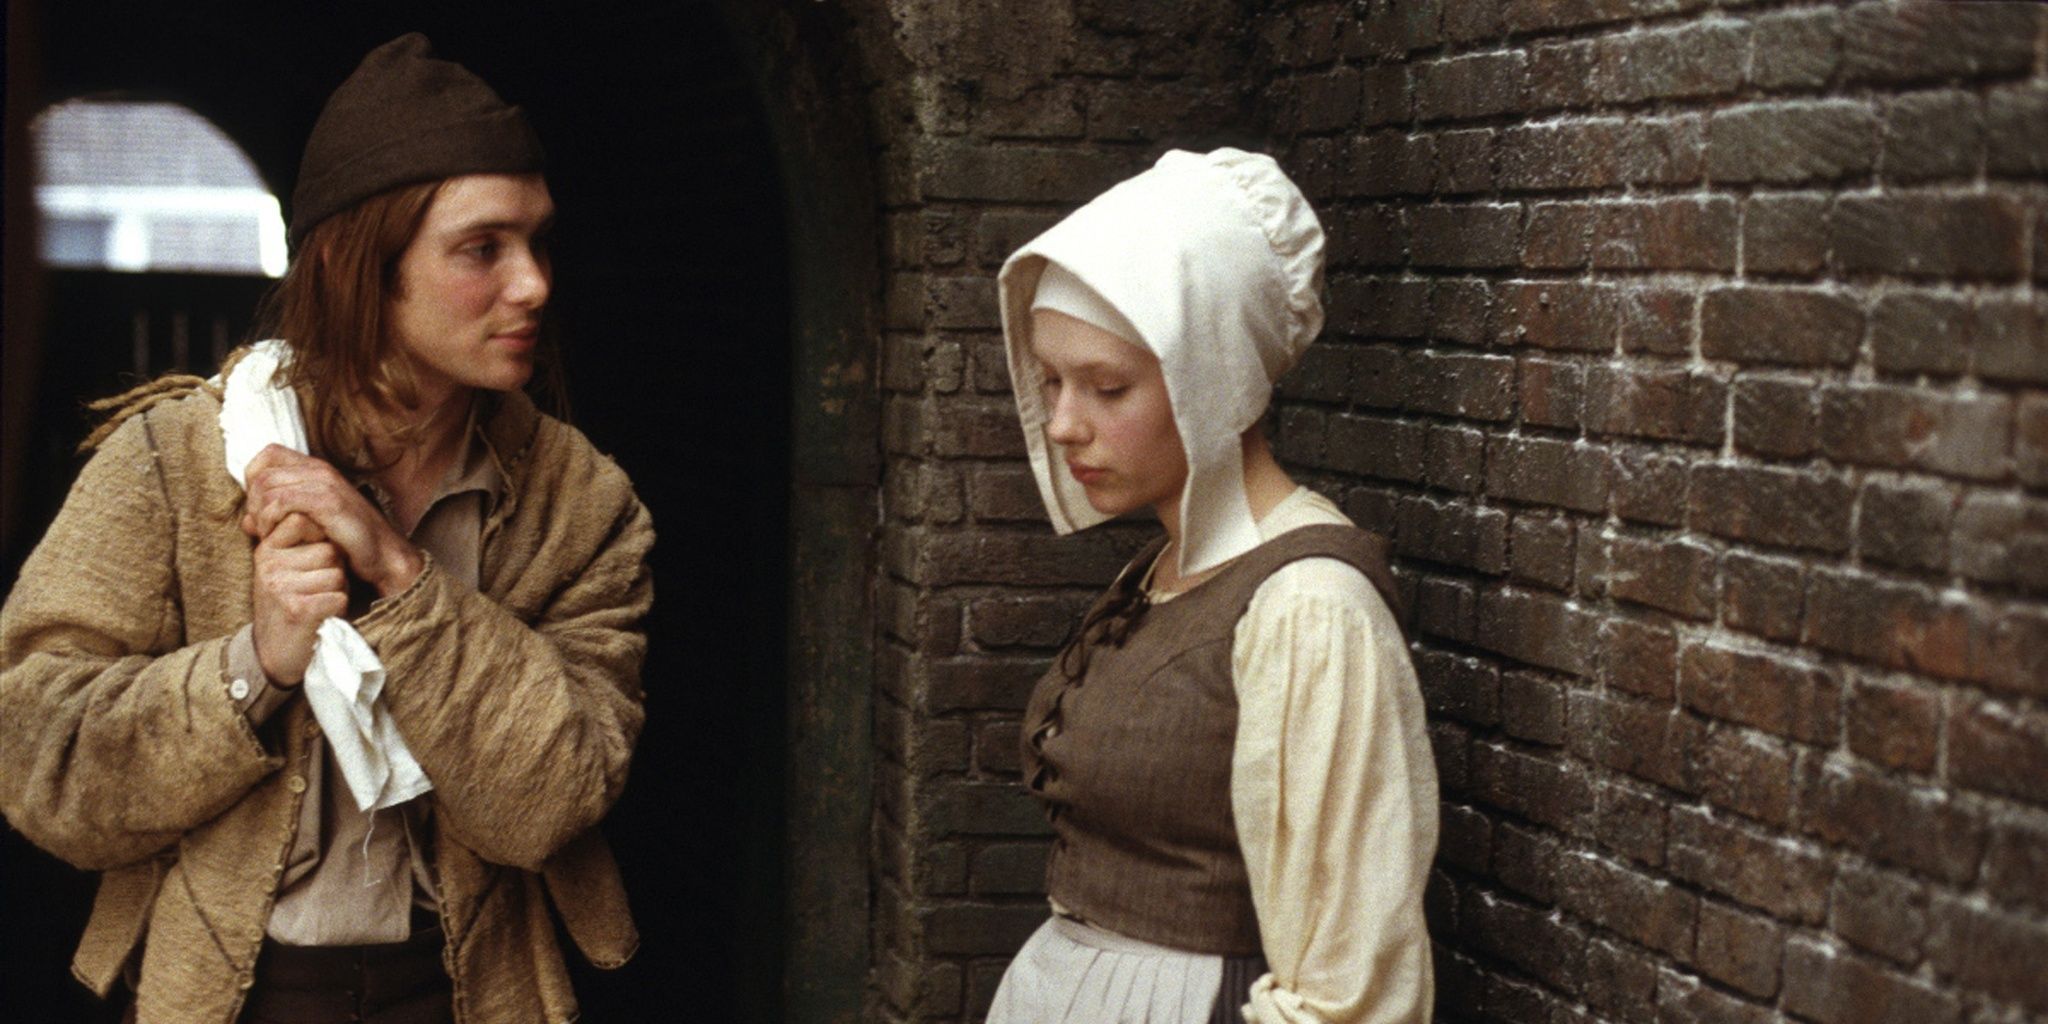 Cillian Murphy and Scalett Johansson in Girl with a Pearl Earring